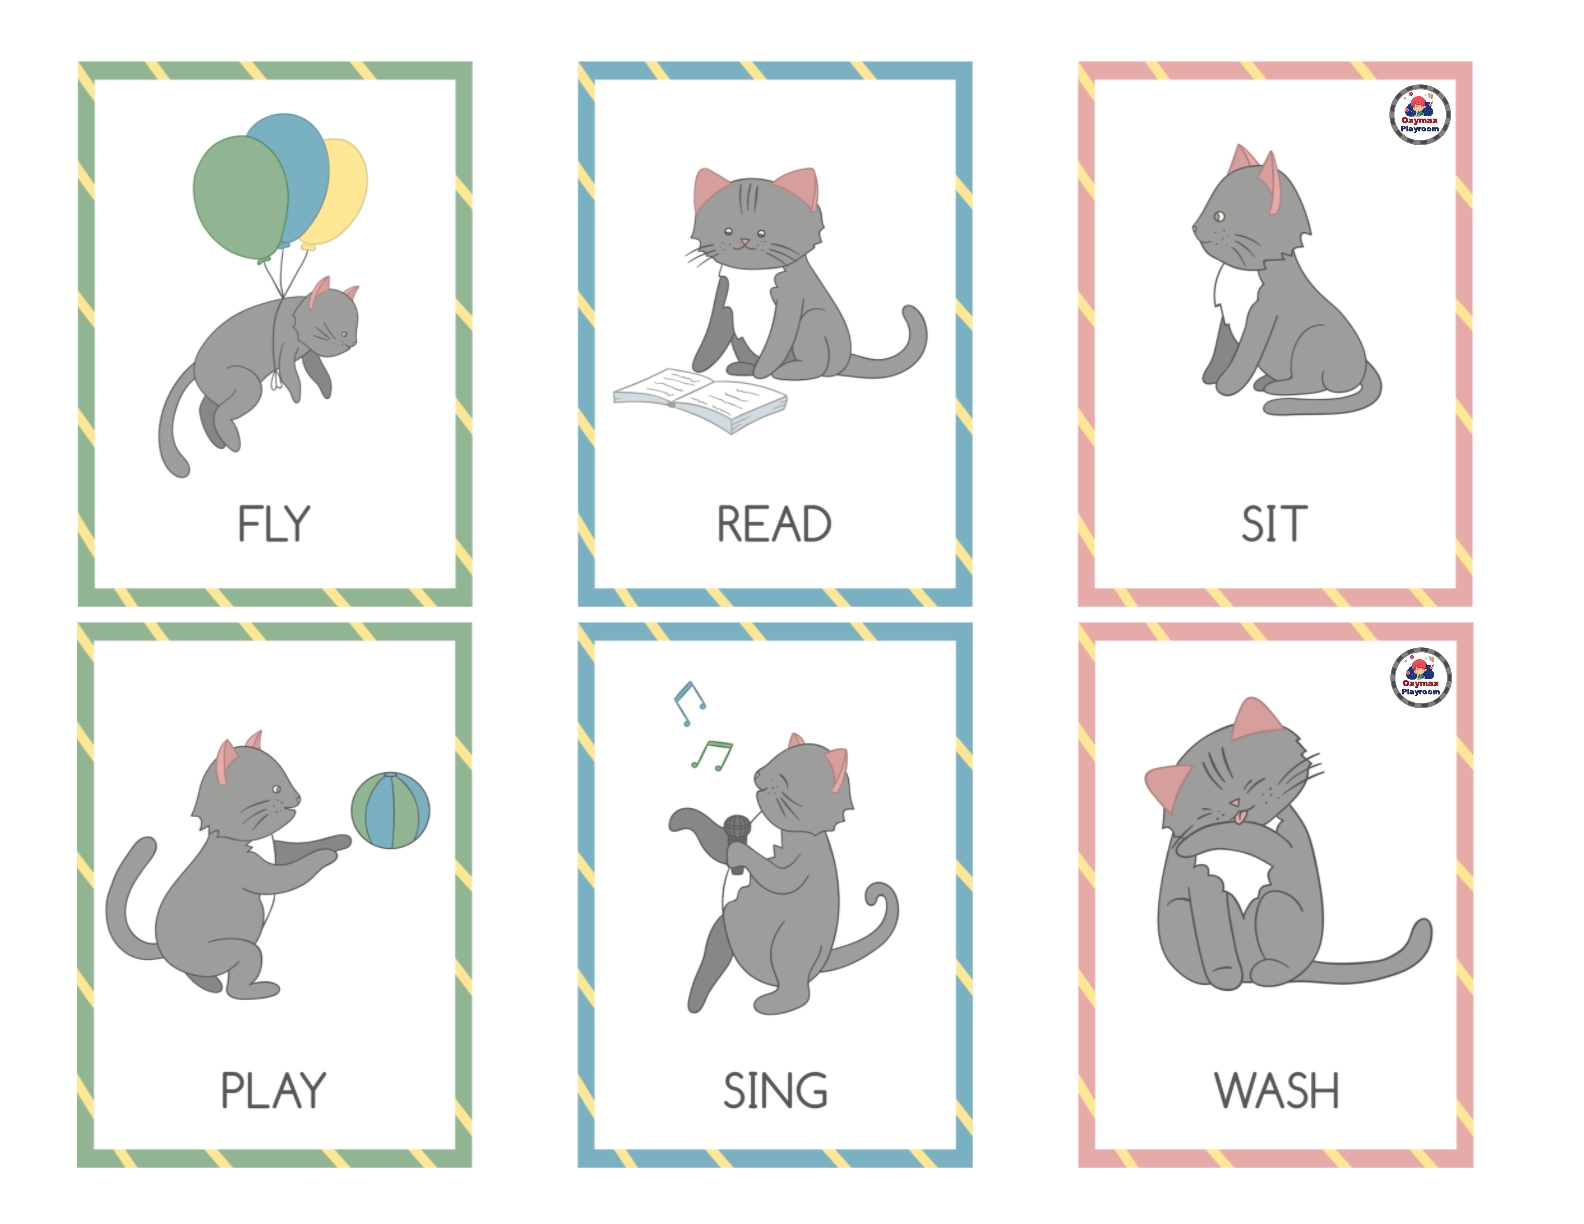 Free verb flashcards for kids